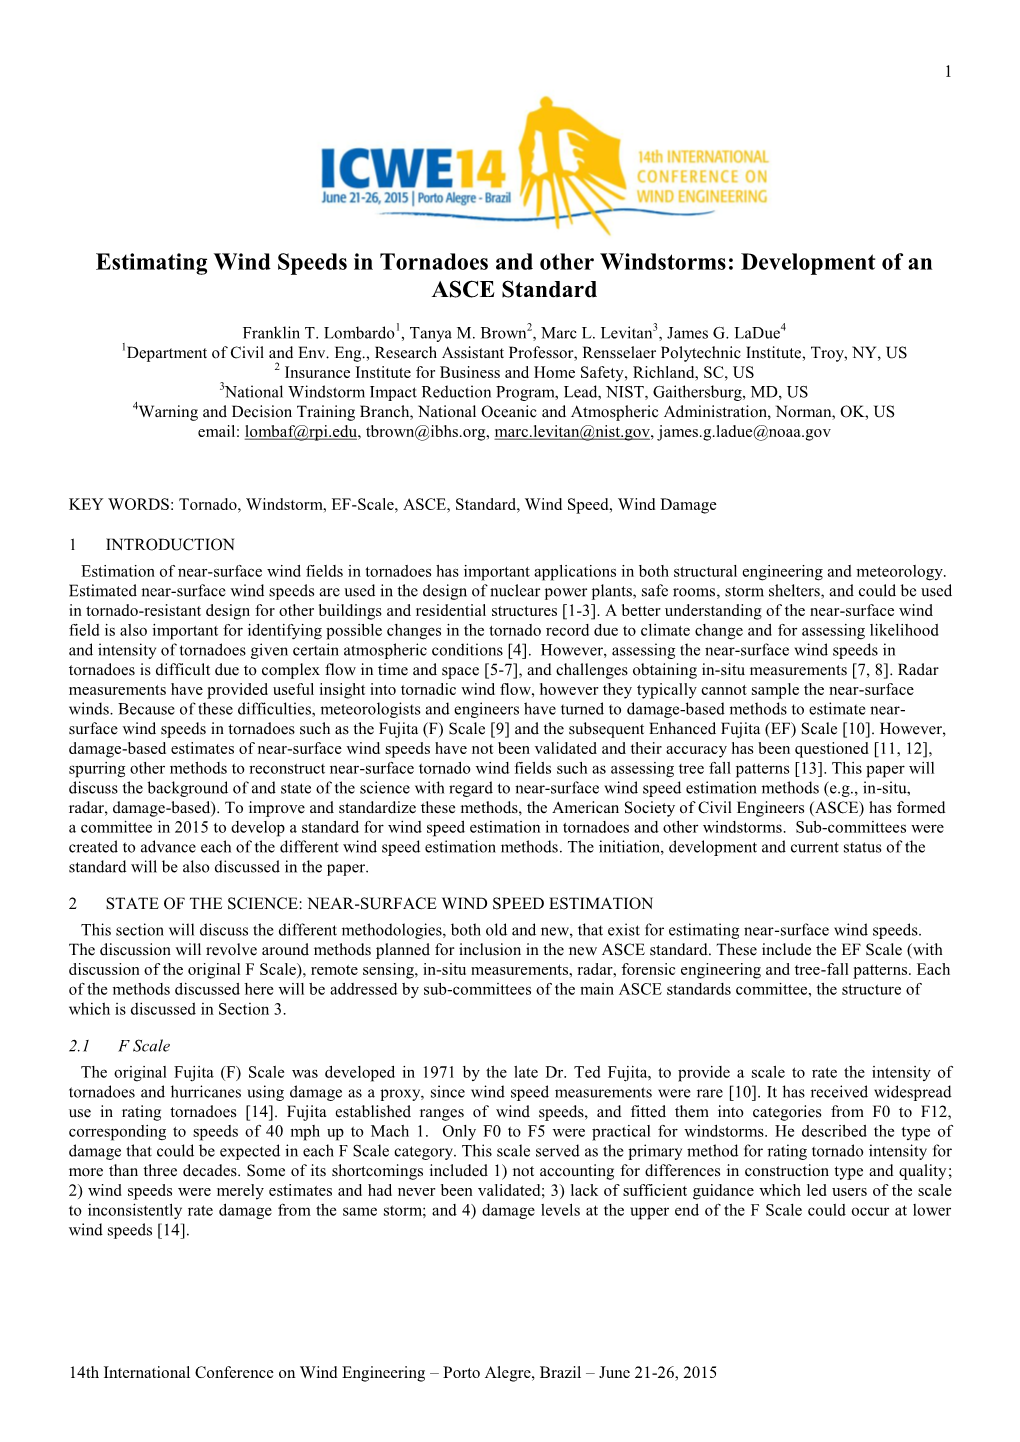 Estimating Wind Speeds in Tornadoes and Other Windstorms: Development of an ASCE Standard